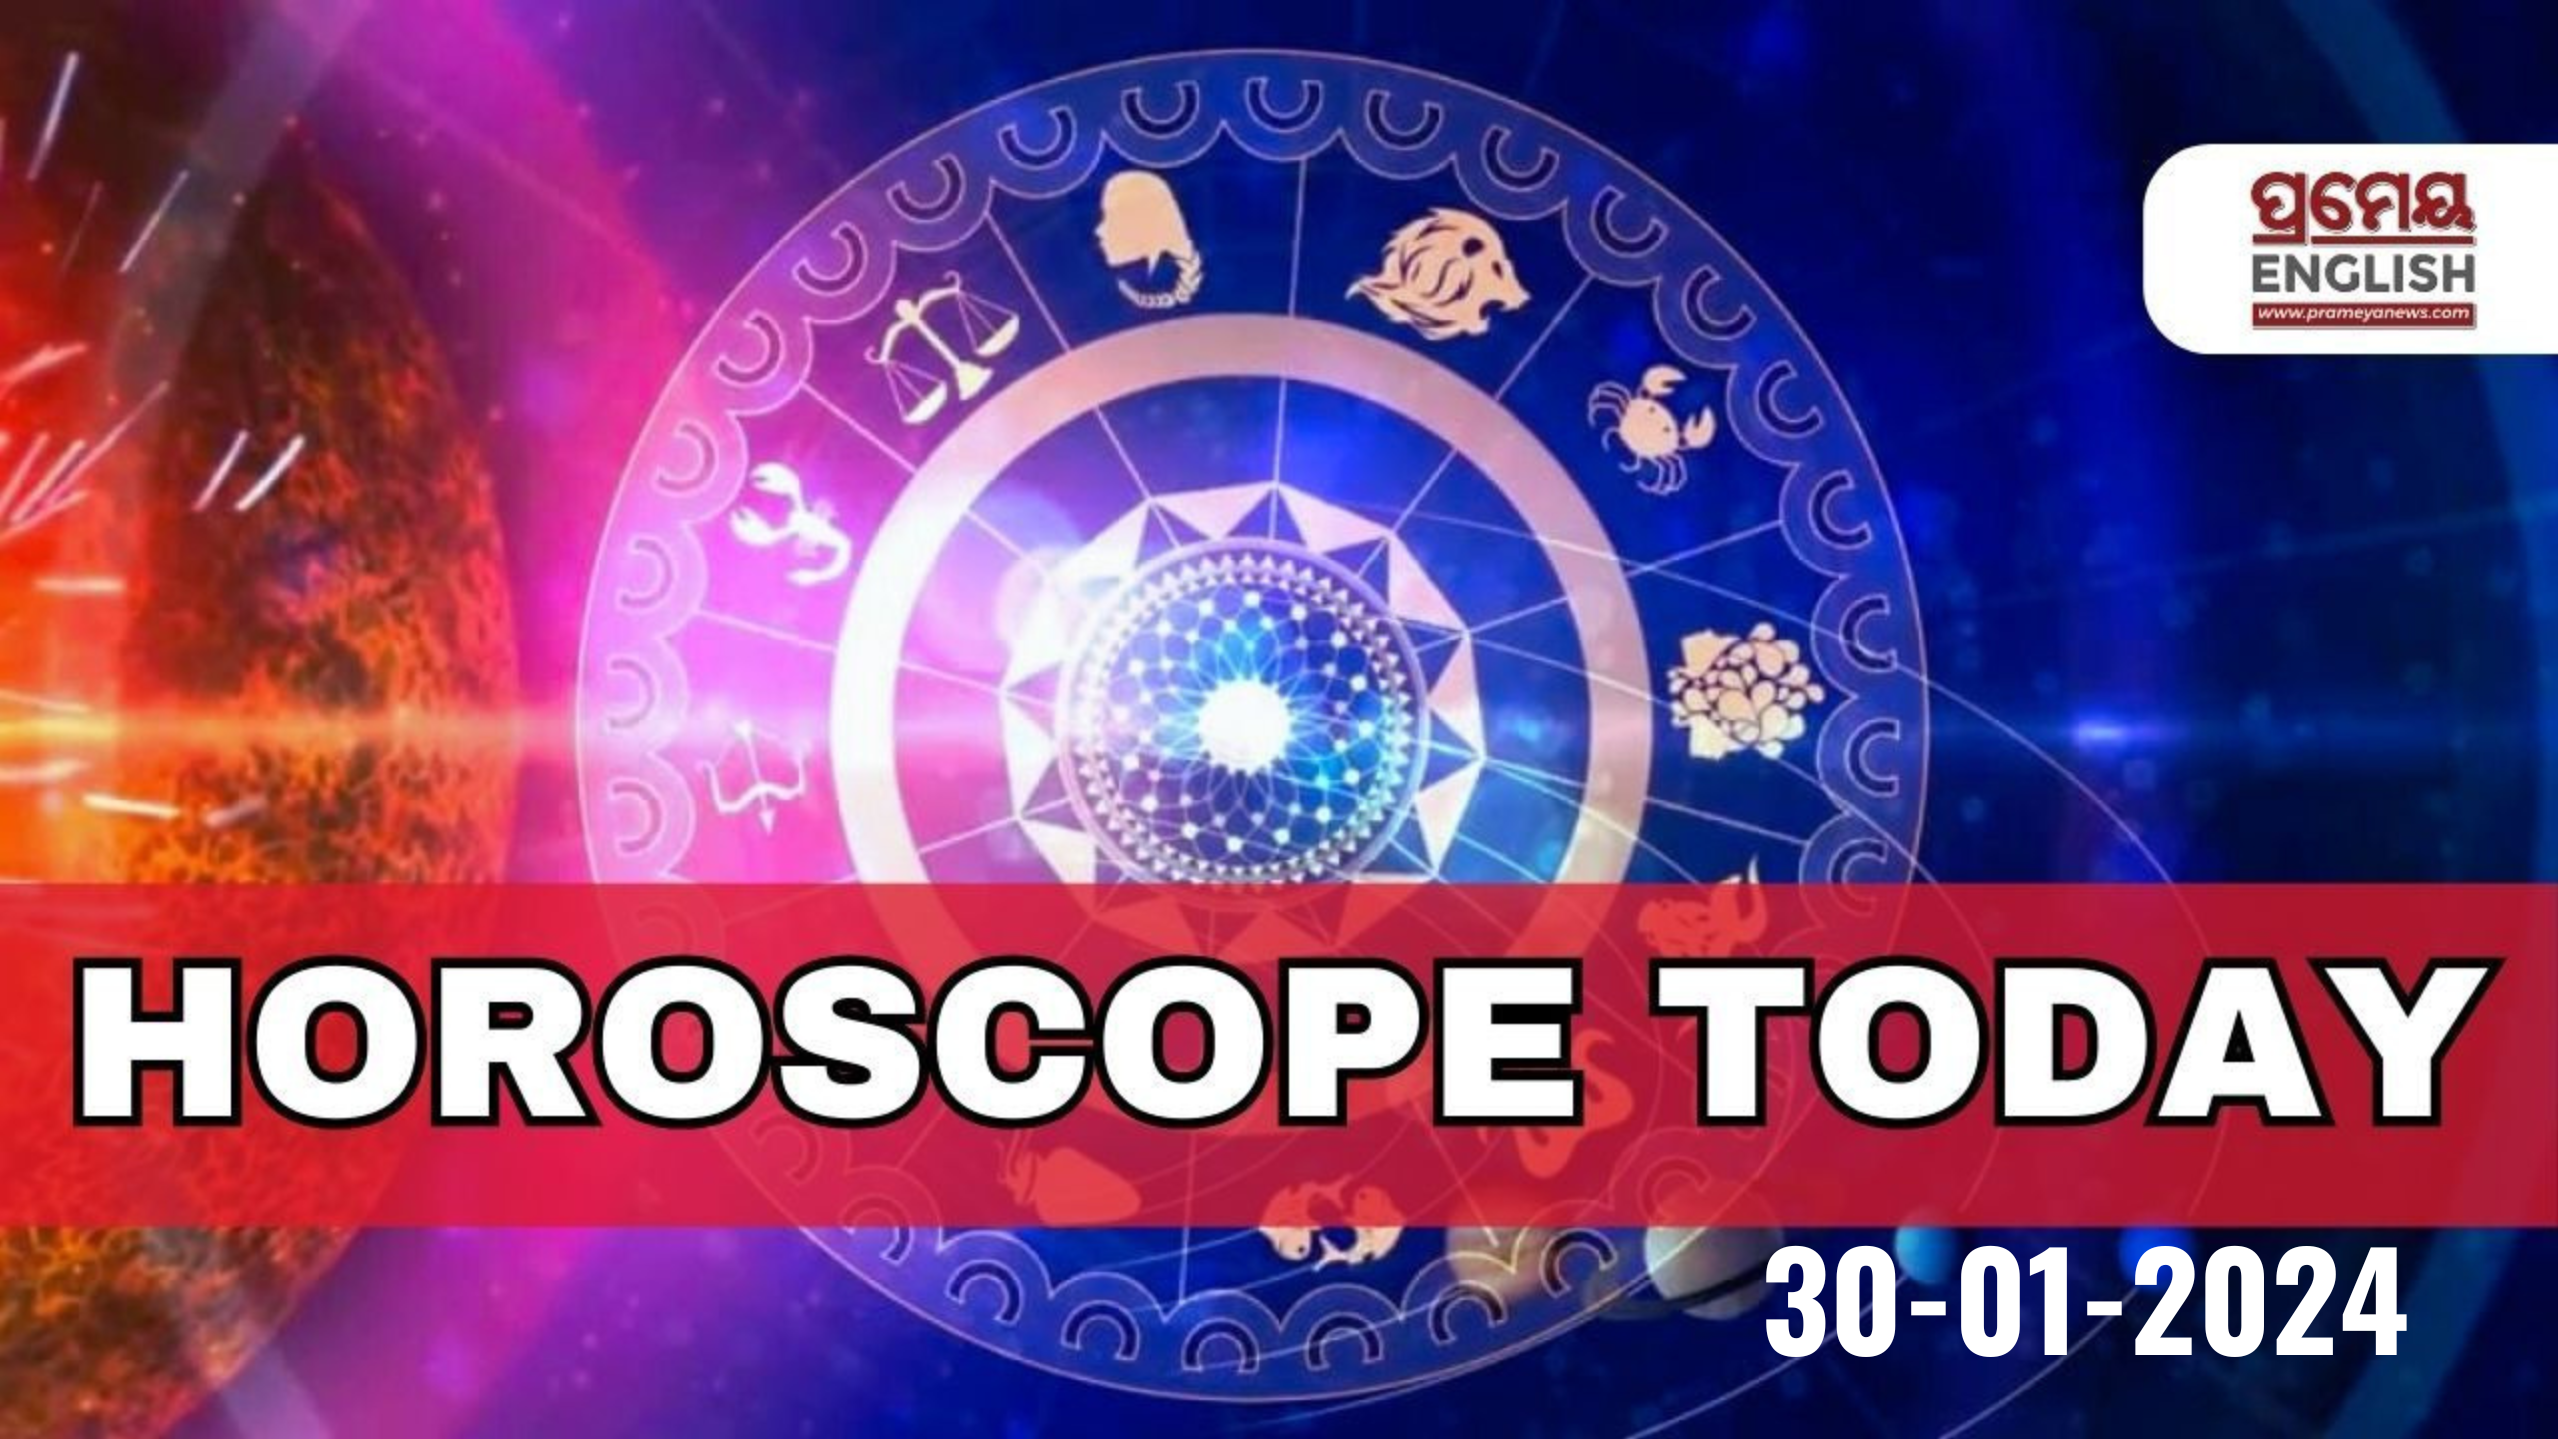 Taurus, Horoscope Today, February 9,2024: Reconnecting with old acquaintances is on the horizon